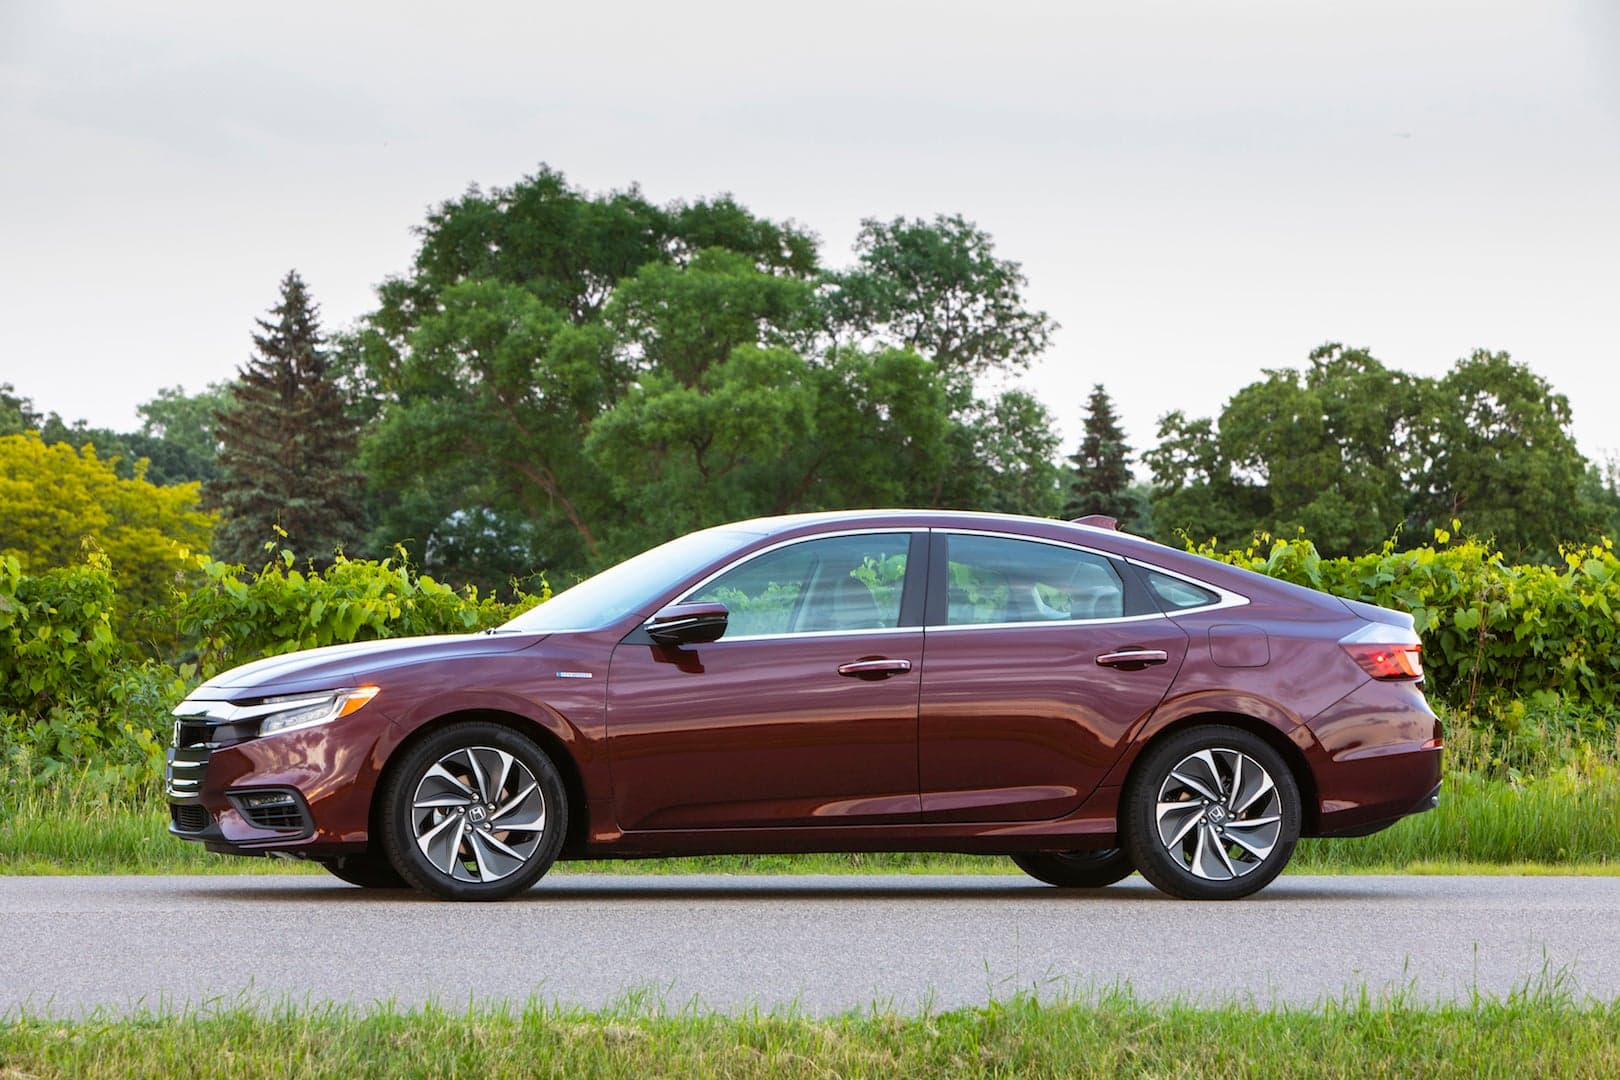 2019 Honda Insight Review: With a Hybrid Like This, Why Would Anyone Buy a Prius?